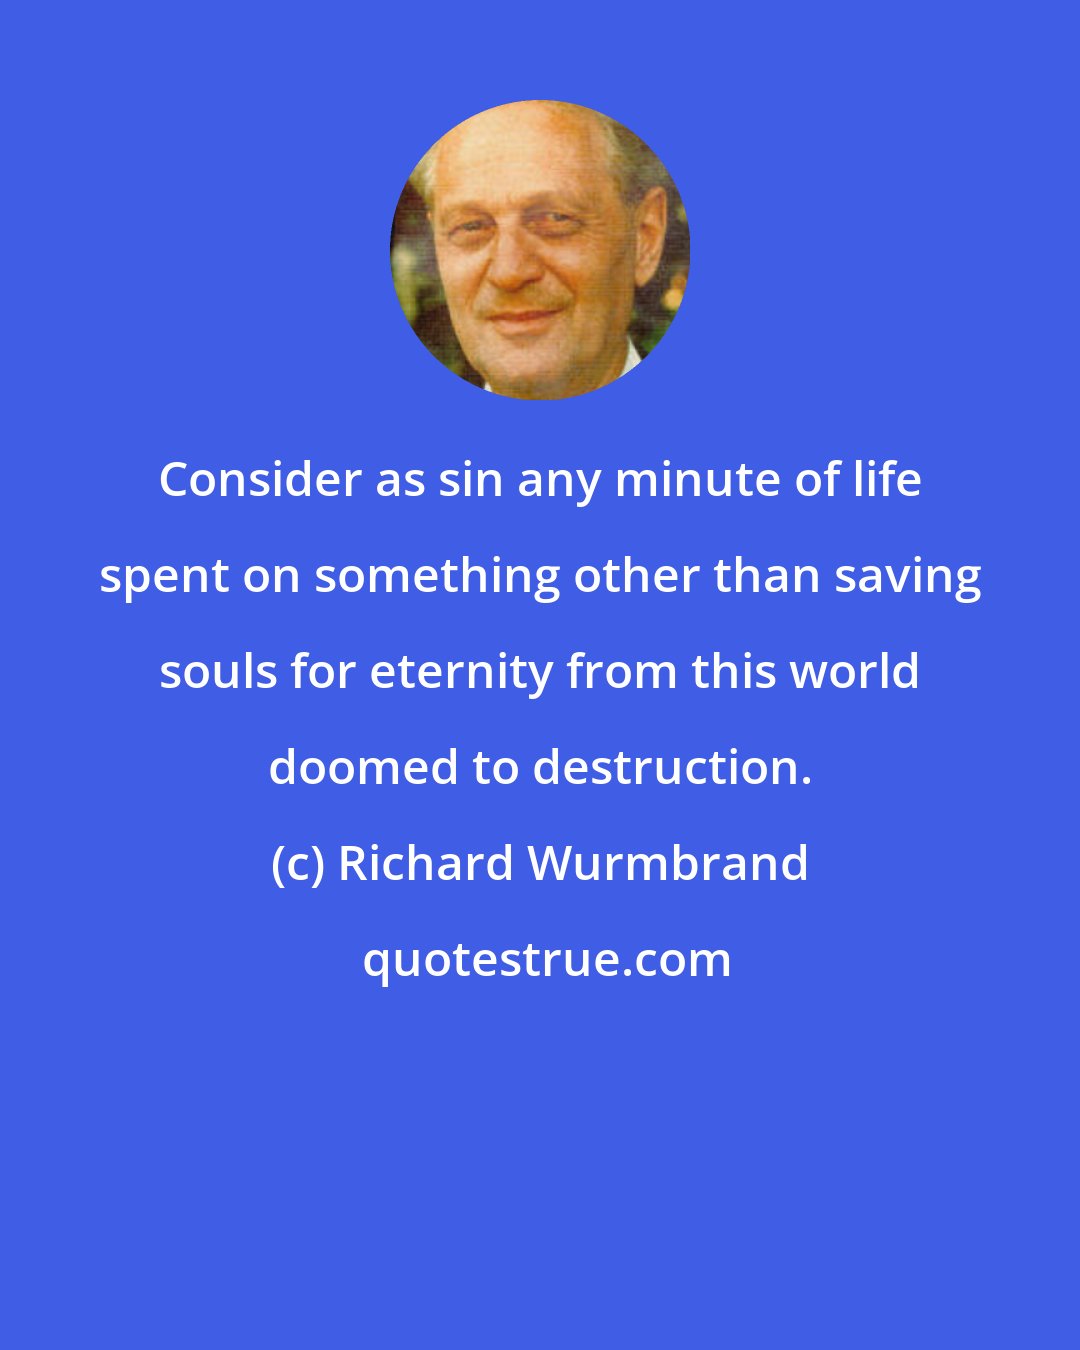 Richard Wurmbrand: Consider as sin any minute of life spent on something other than saving souls for eternity from this world doomed to destruction.